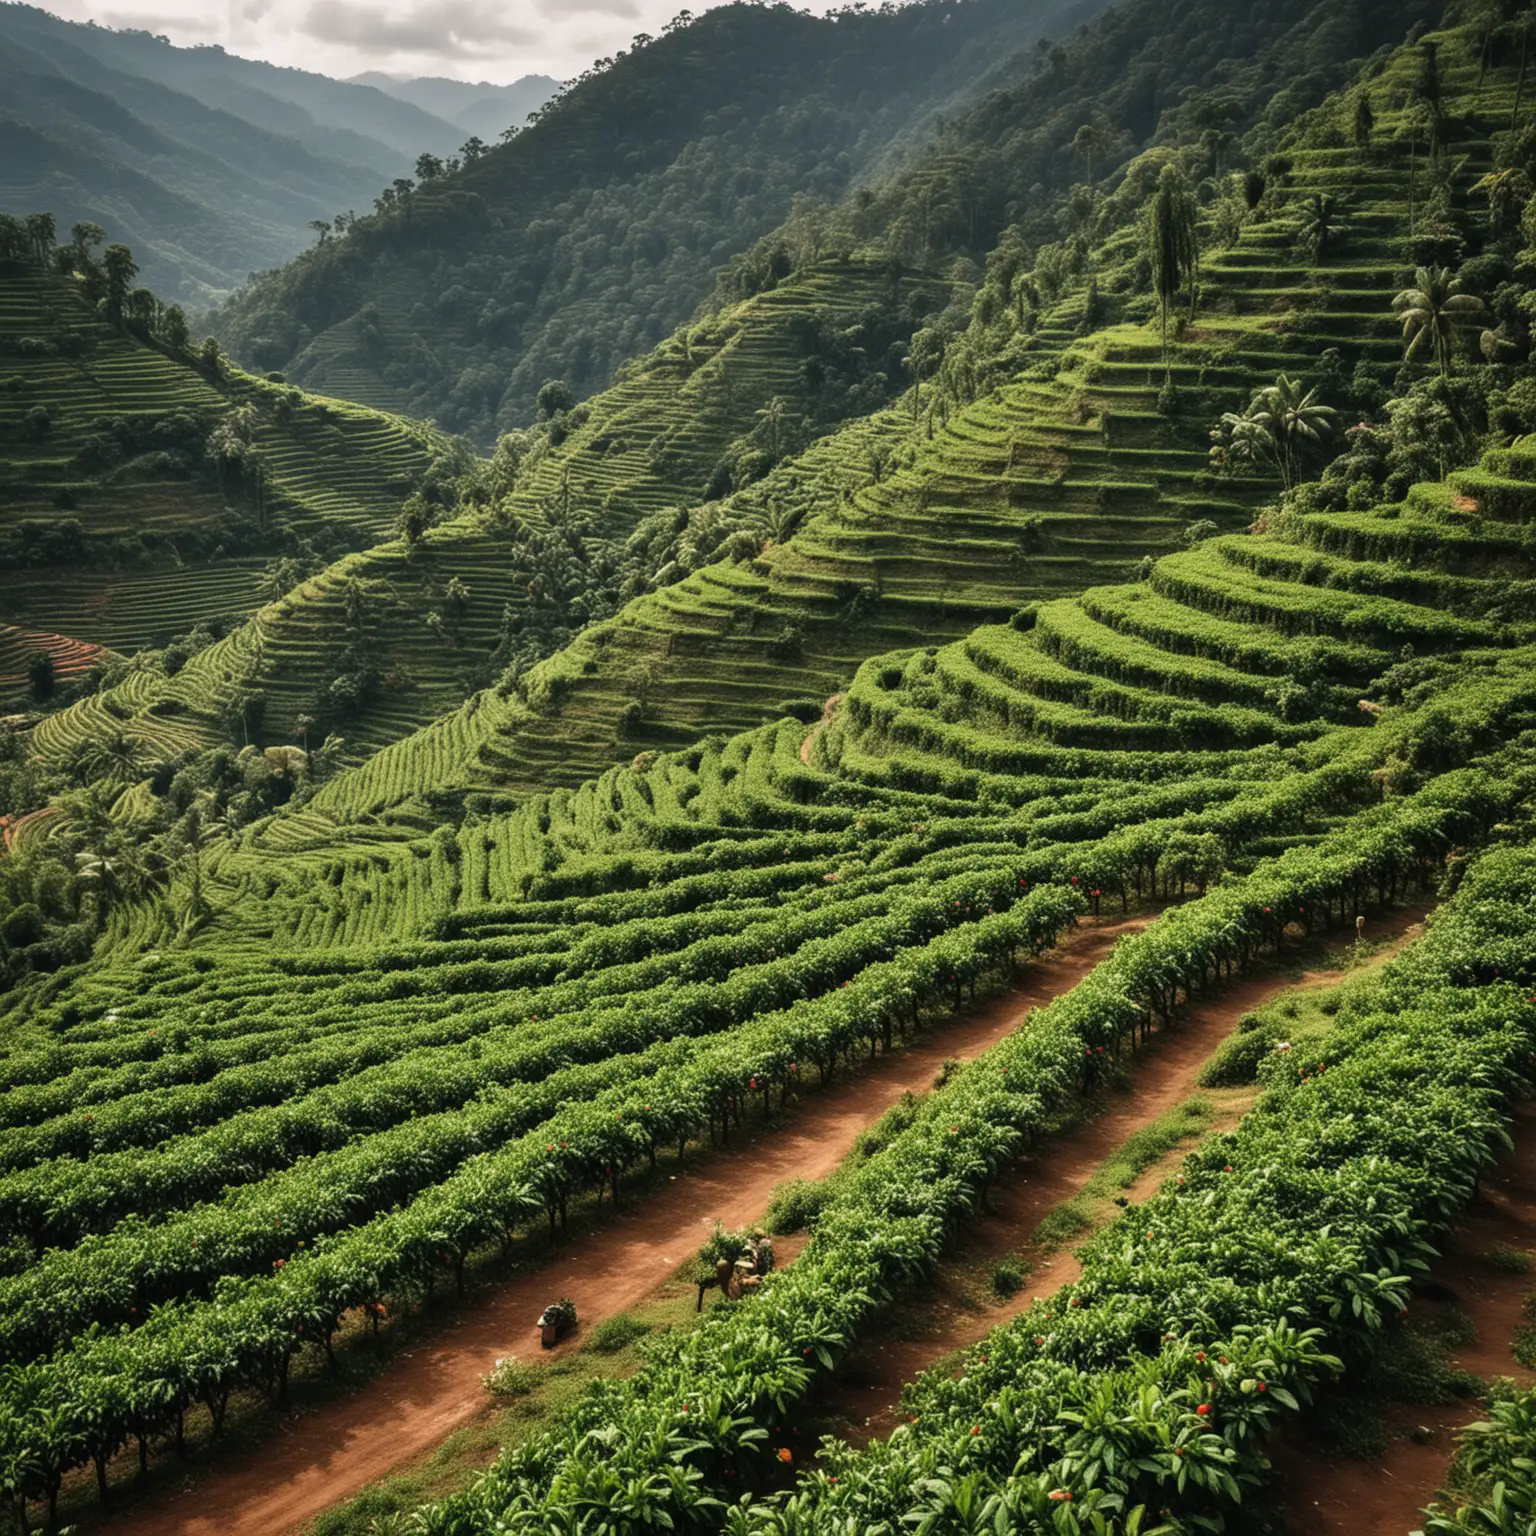 Show me images of coffee plantations in different parts of the world. Show a nice scenary
